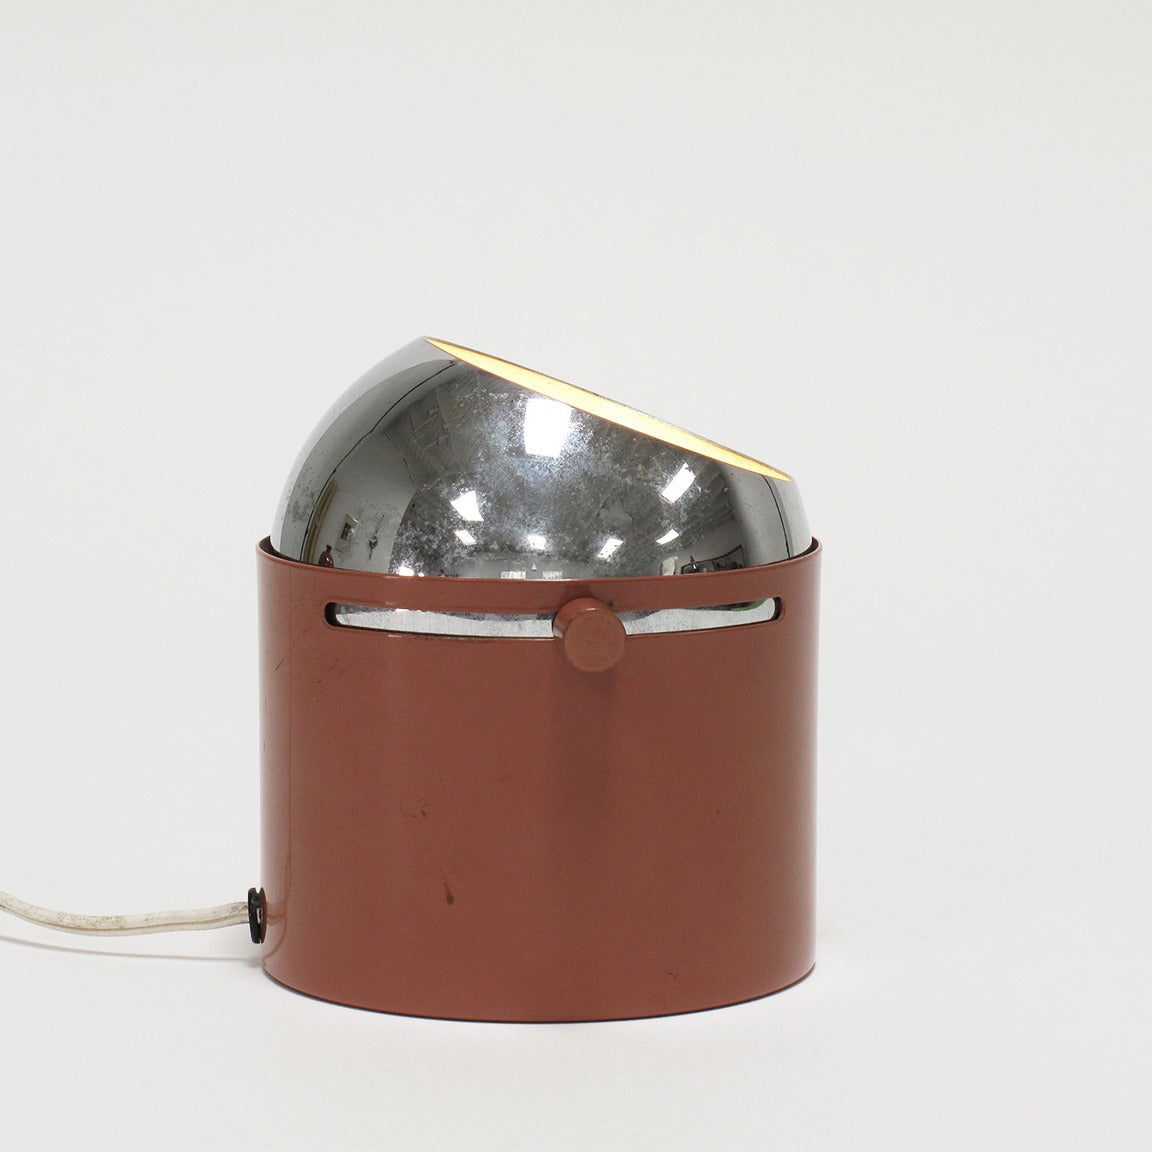 Unique, small-scale spotlight lamp designed by Bill Curry, Design Line Inc., El Segundo, California, mid-late 1960s production, original electrical has been tested and is in working order.